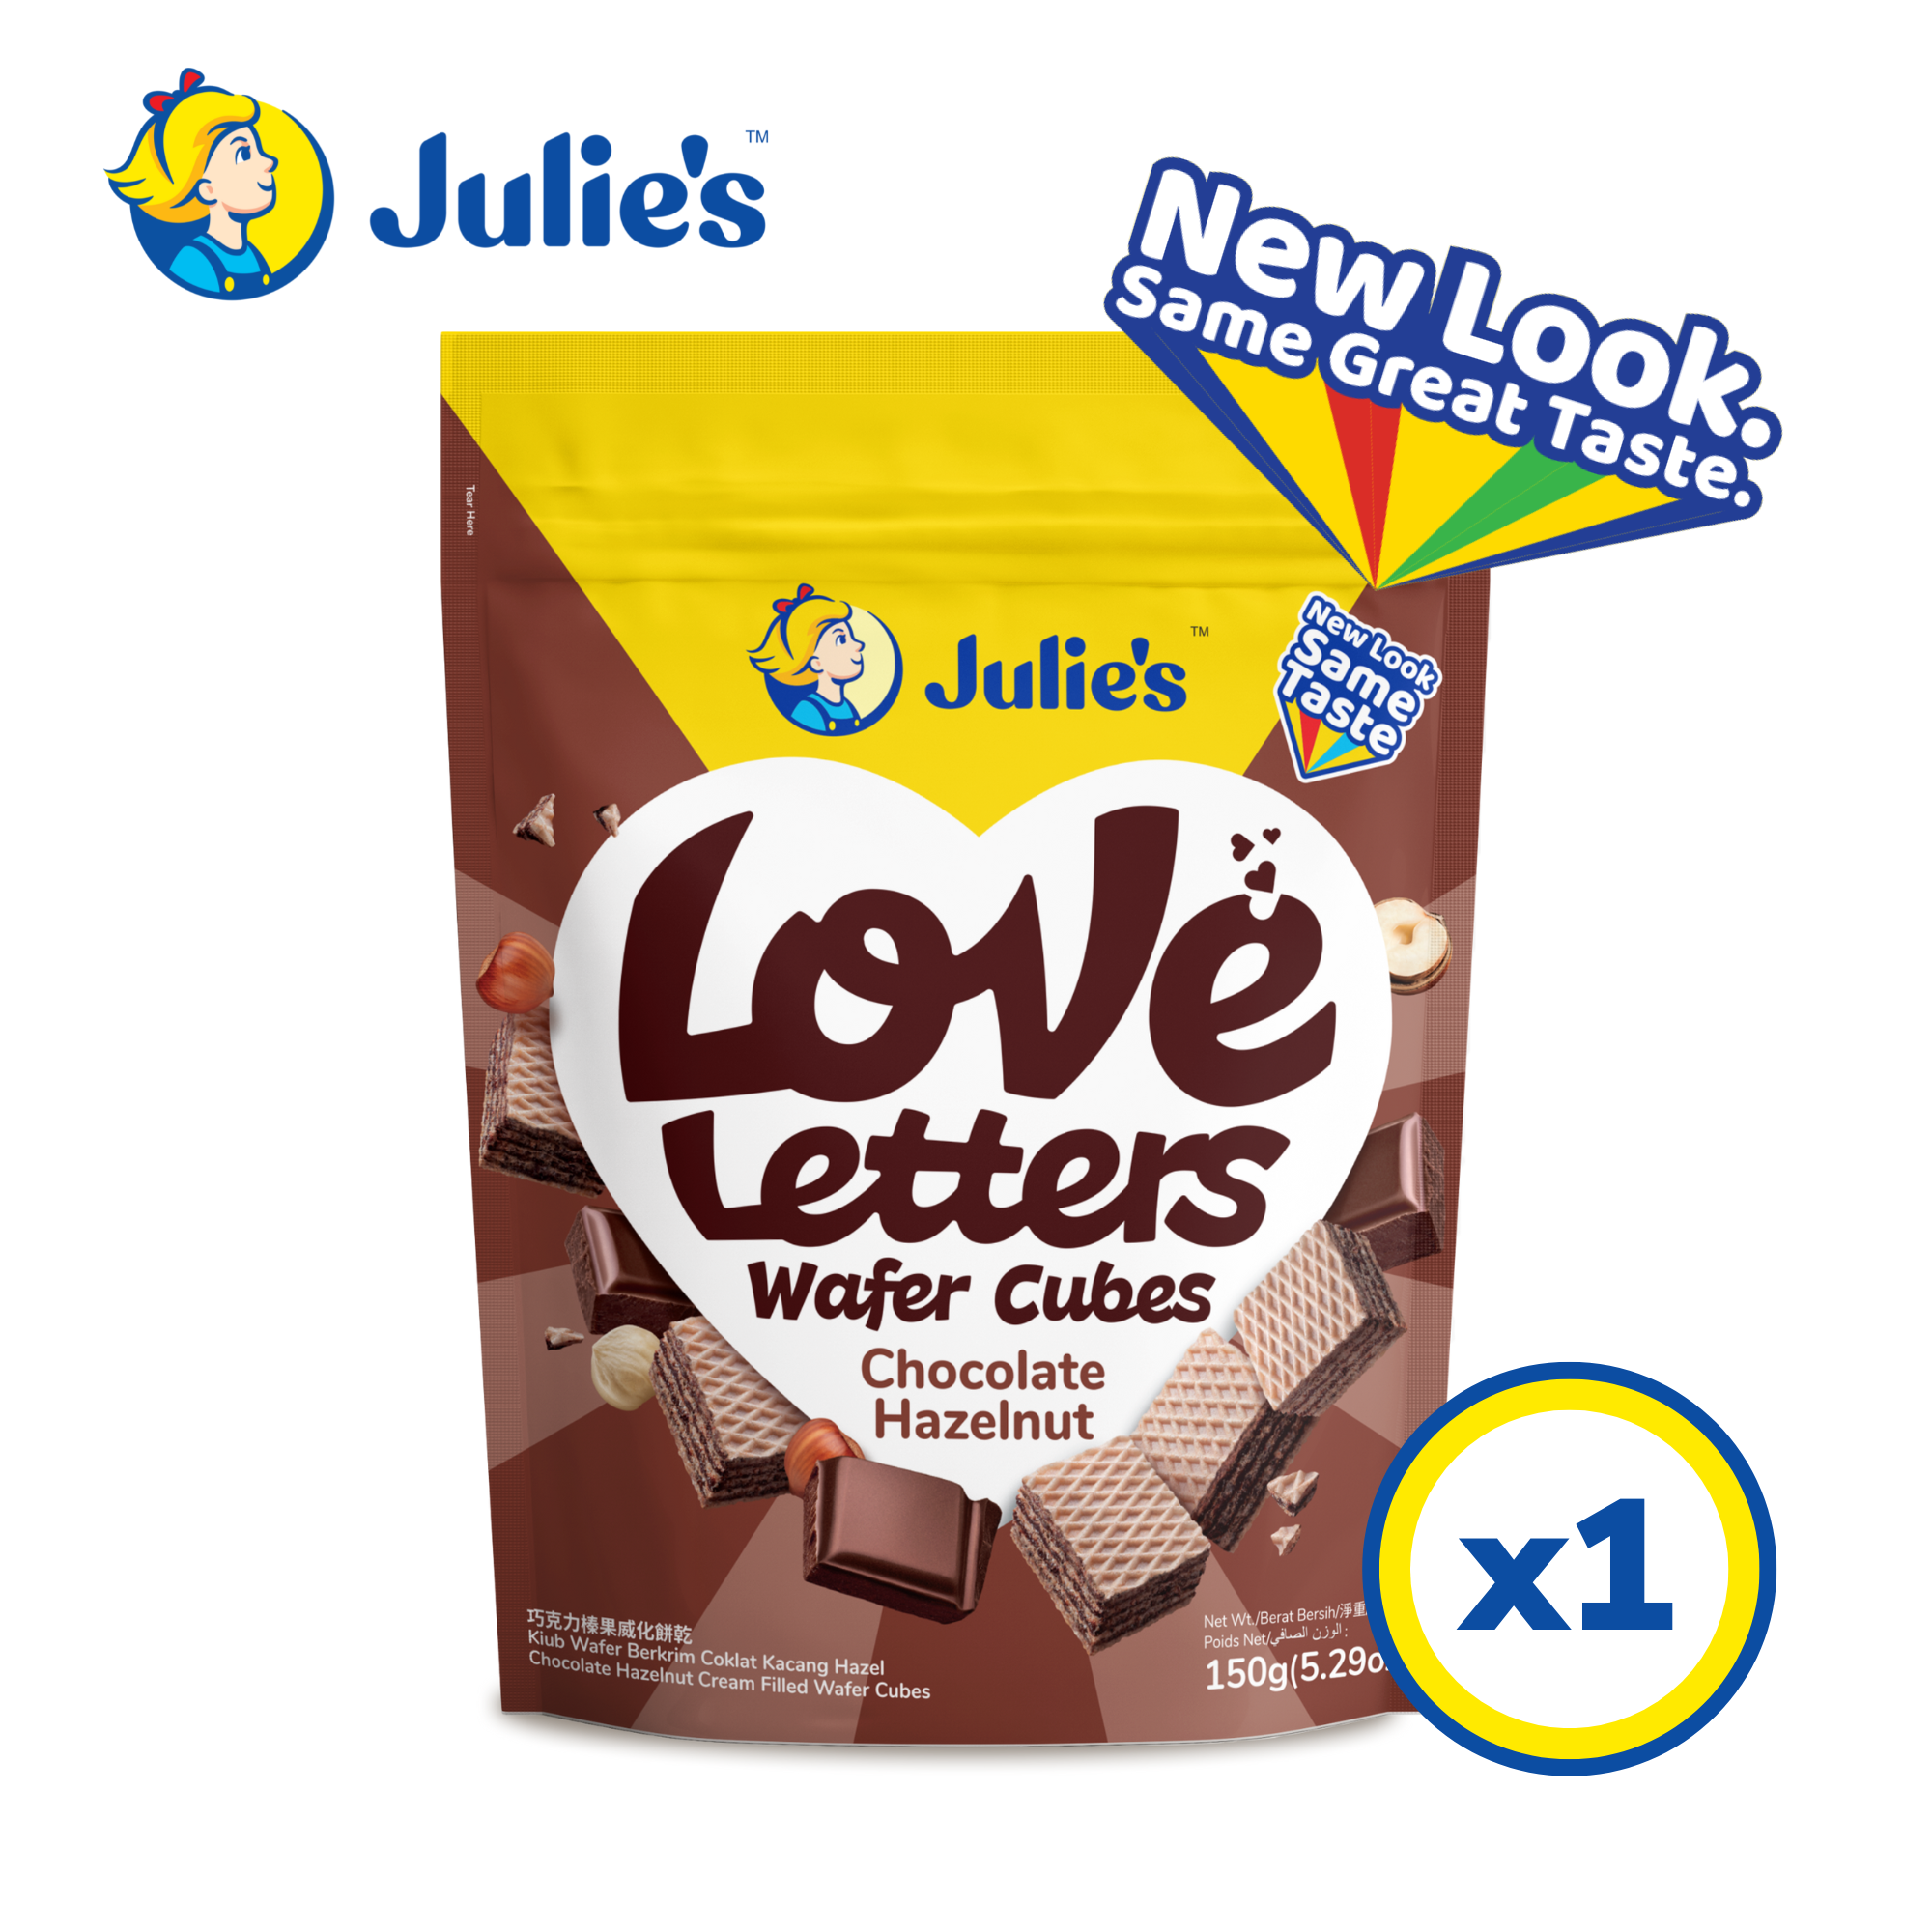 Julie's Love Letters Wafer Cubes Chocolate Hazelnut 150g x 1 pack